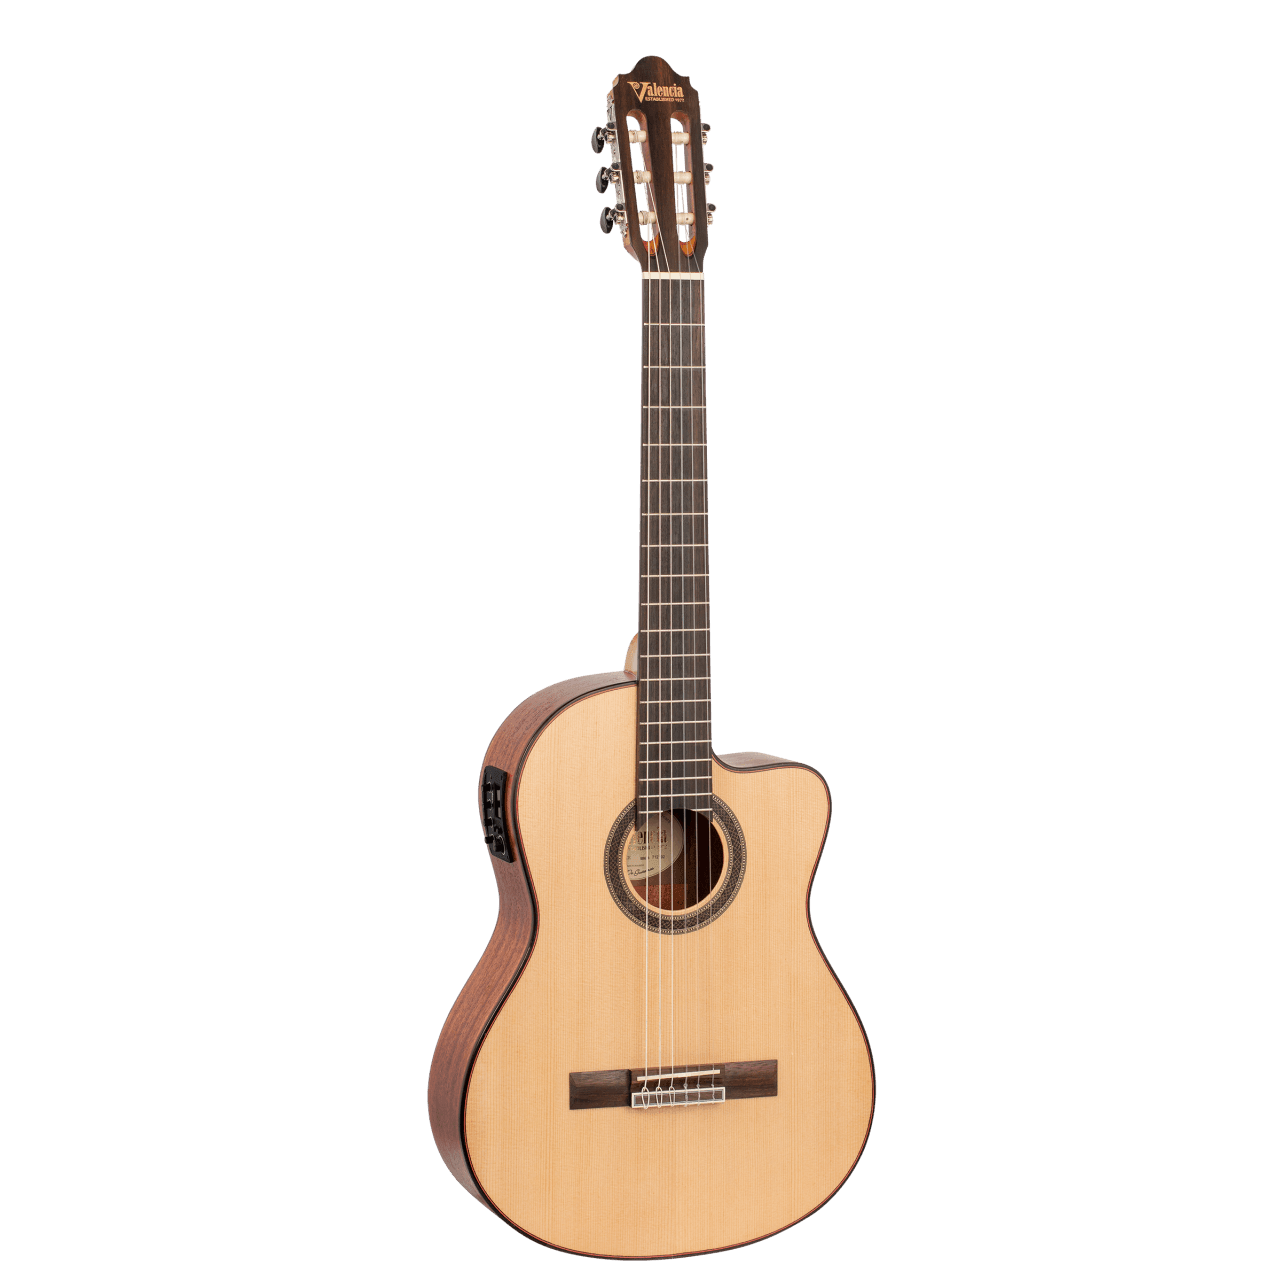 VC704CE Classical Acoustic Cutaway w/Pickup - Guitars - Classical by Valencia at Muso's Stuff